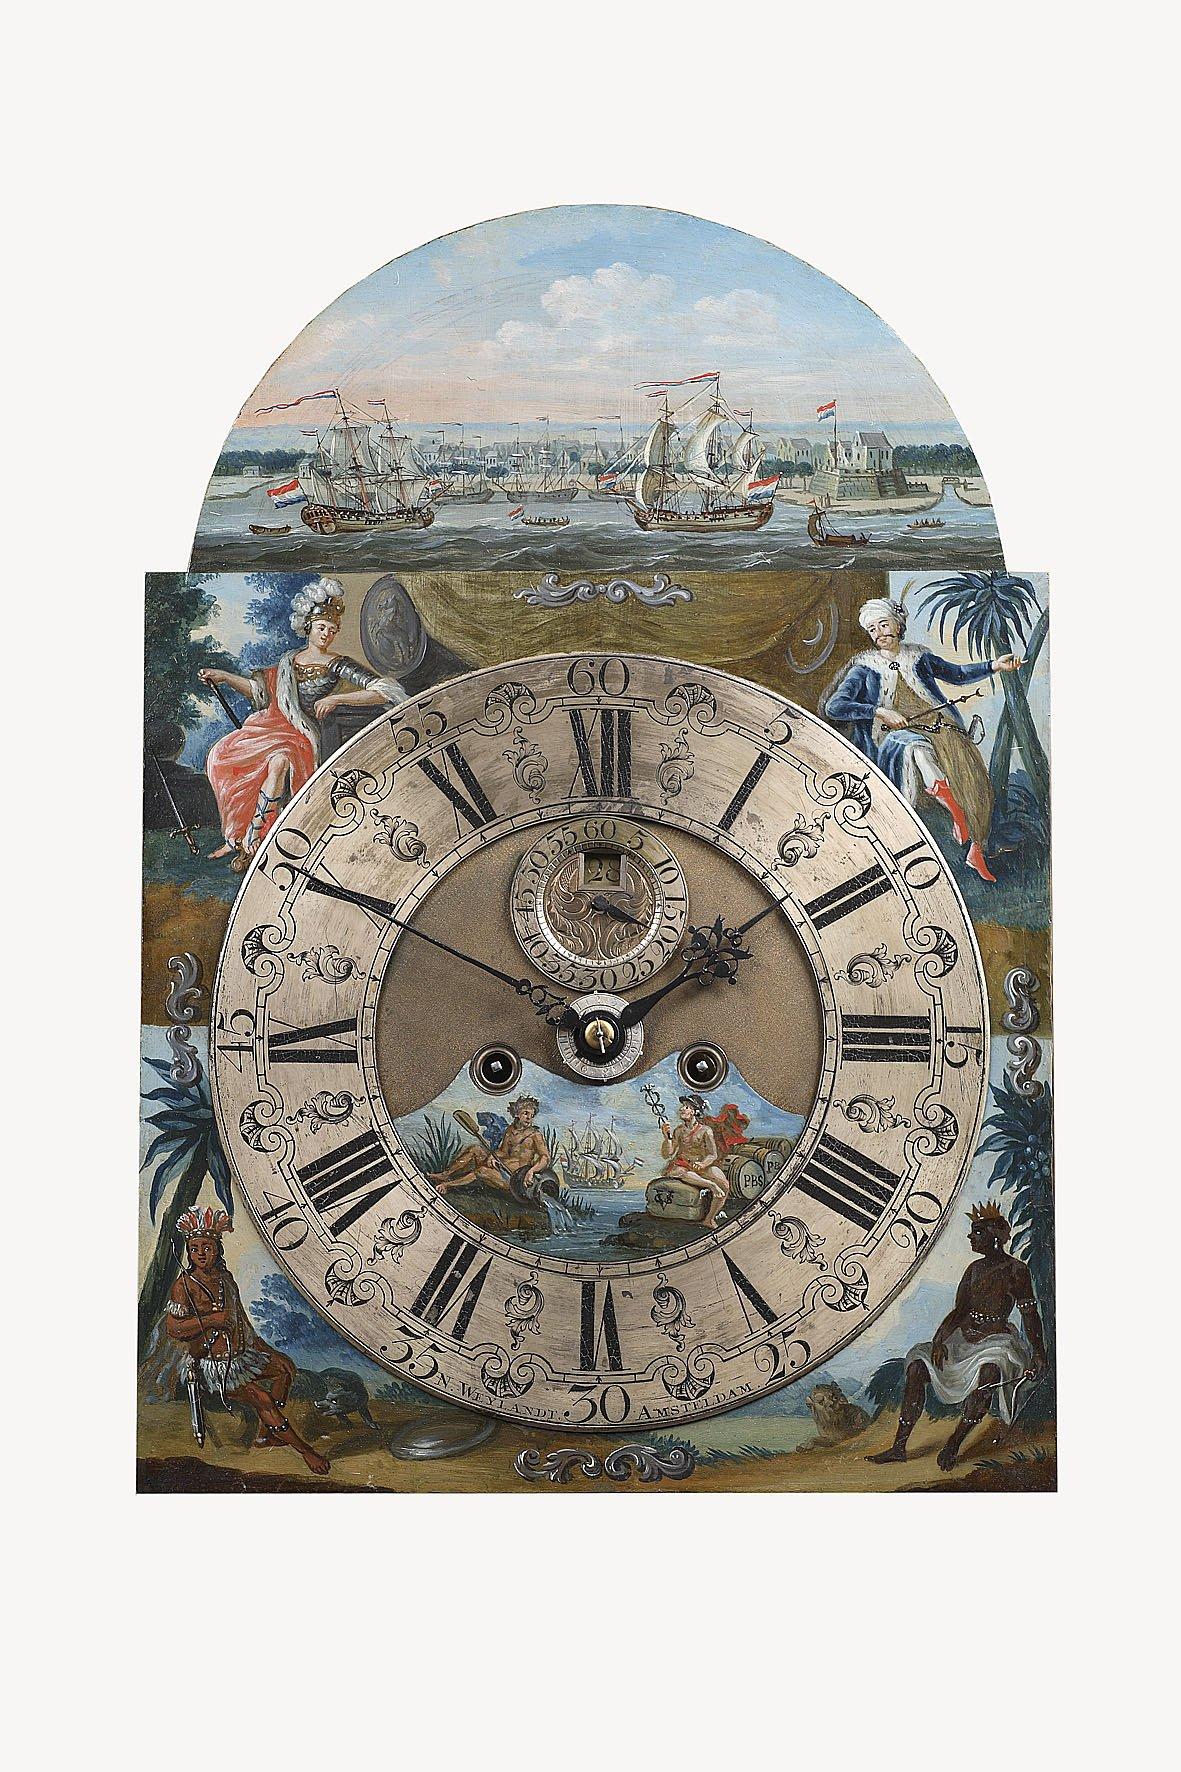 A Surinam-themed Amsterdam long-case clock

The Netherlands, 1746-1756, dial signed Nicolaas Weylandt/Amsterdam

The case of the clock is made of Rio palisander veneer and snakewood, with the arch showing a painted scene of the harbour of